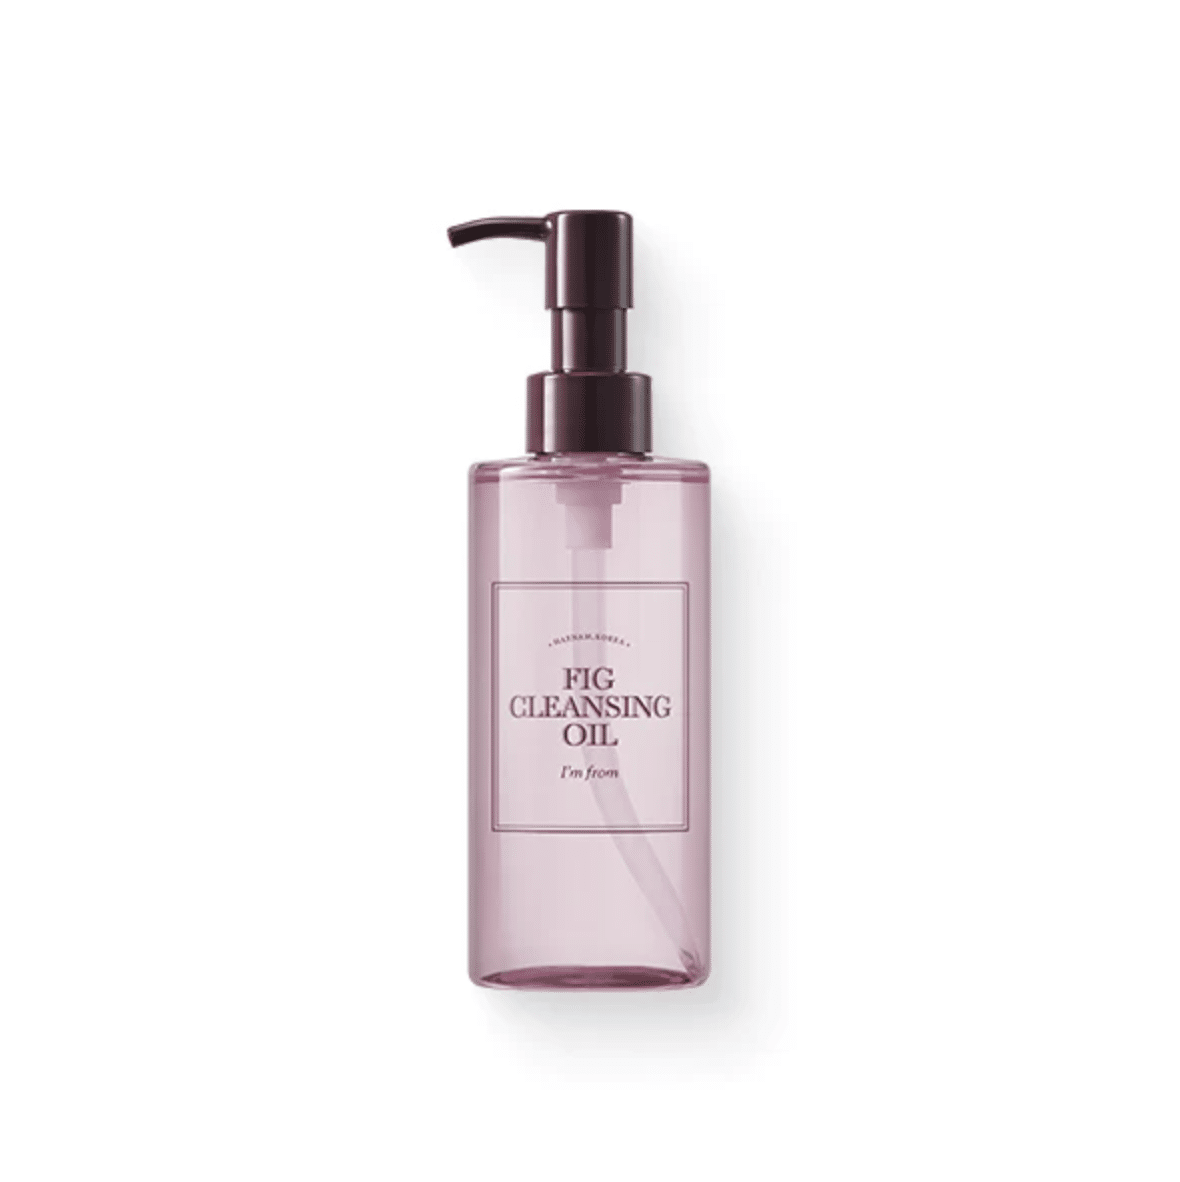 I'm from - Fig Cleansing Oil